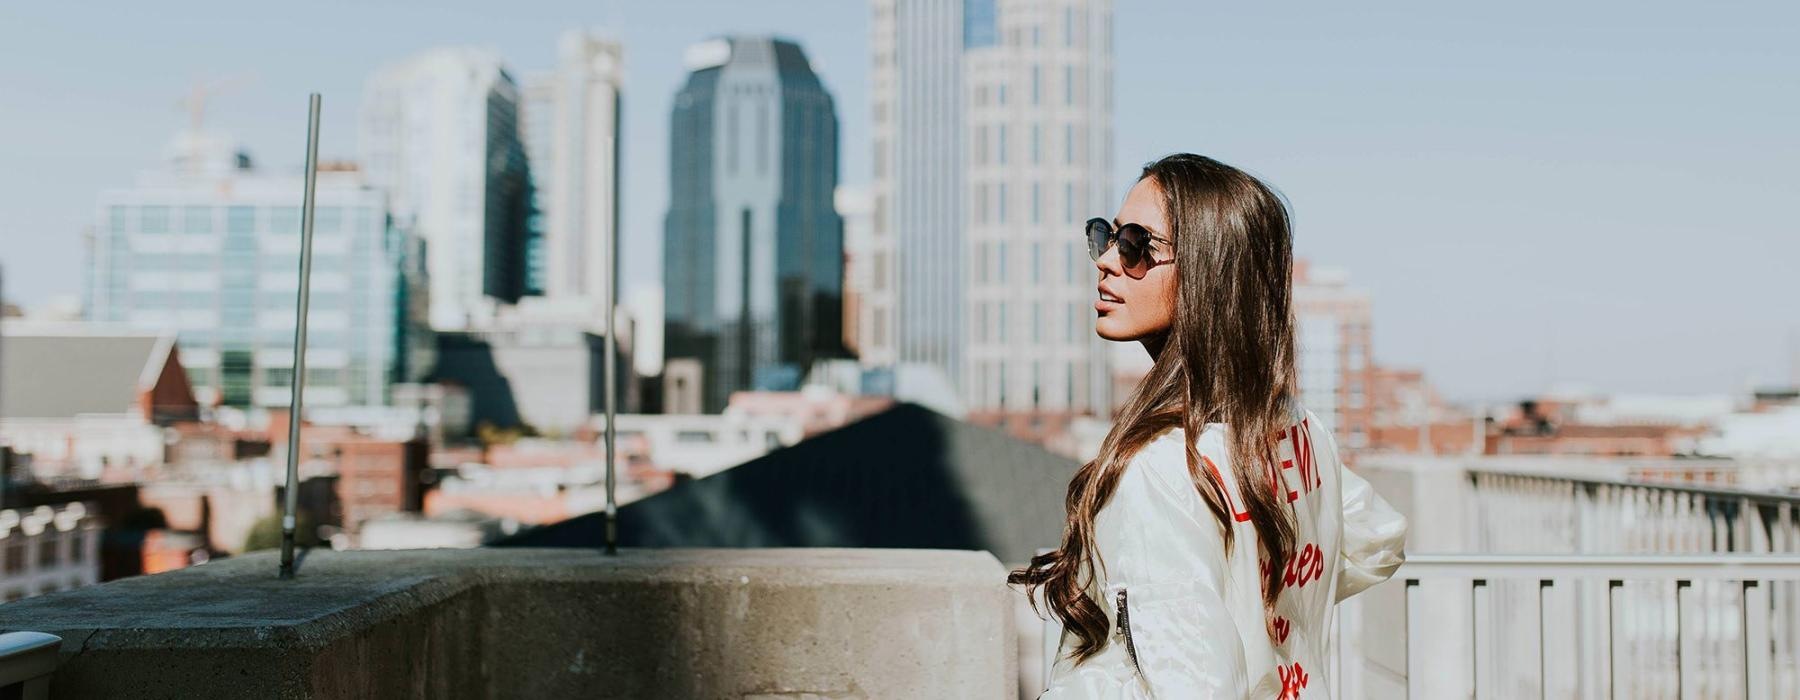 woman with sunglasses stands on a rooftop overlooking the city